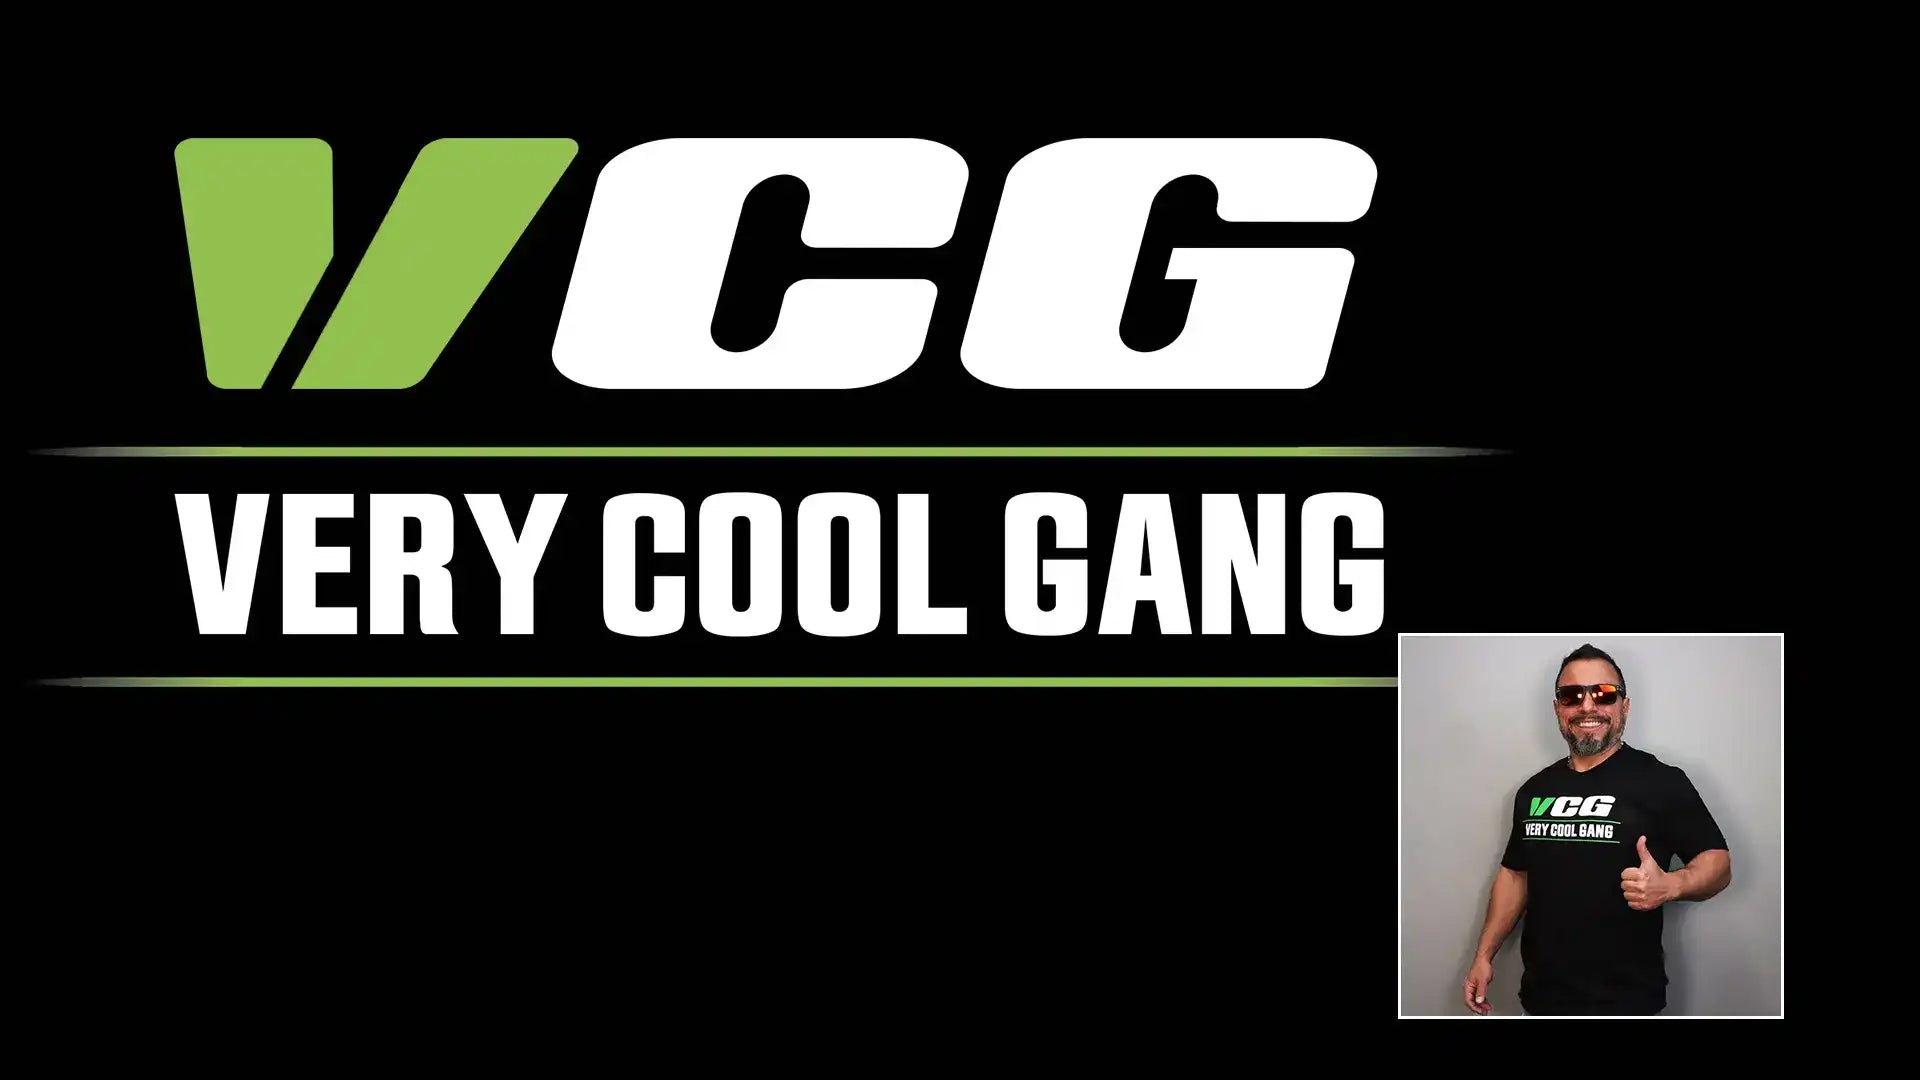 Black Bacgroung Big EGO VCG VeryCoolGang Logo Vince in lower right corner wearing soft black shirt with logo